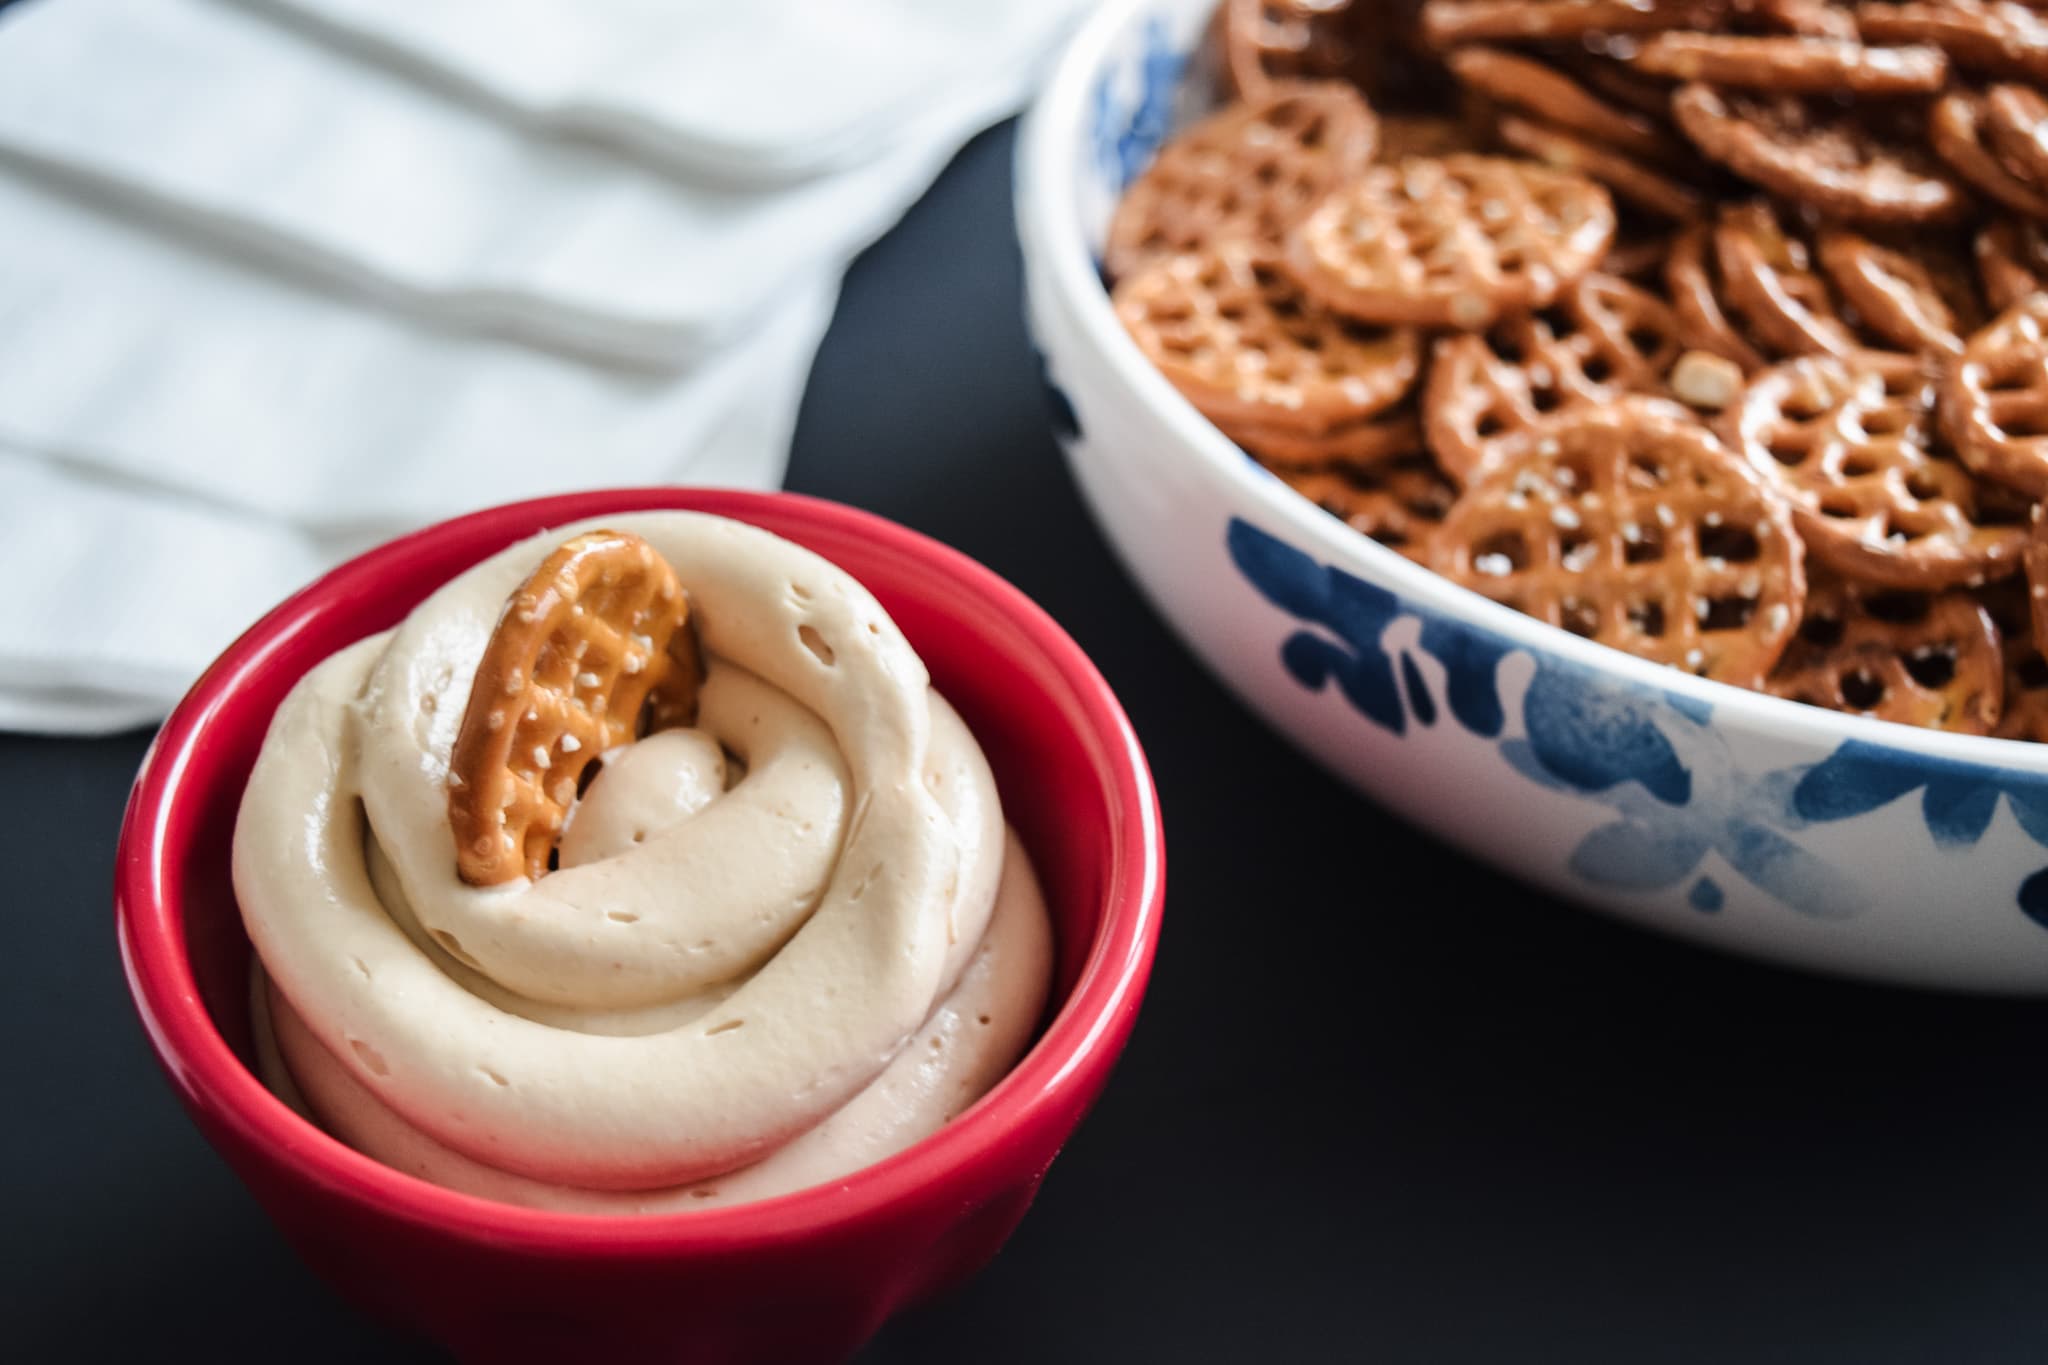 Peanut butter dip made with cream cheese in a small red ramekin